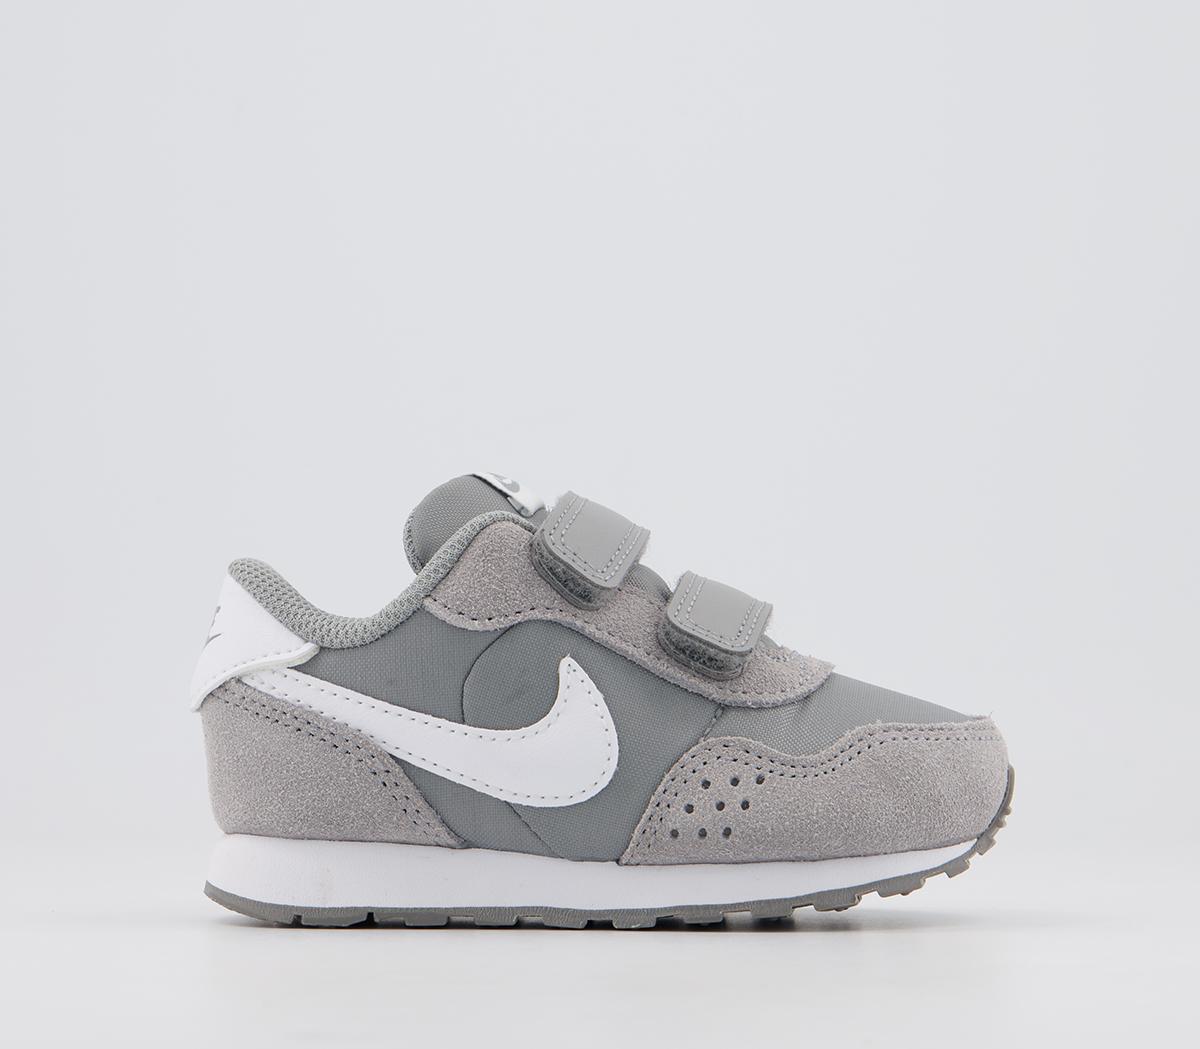 NikeMd Valiant Infant TrainersParticle Grey White